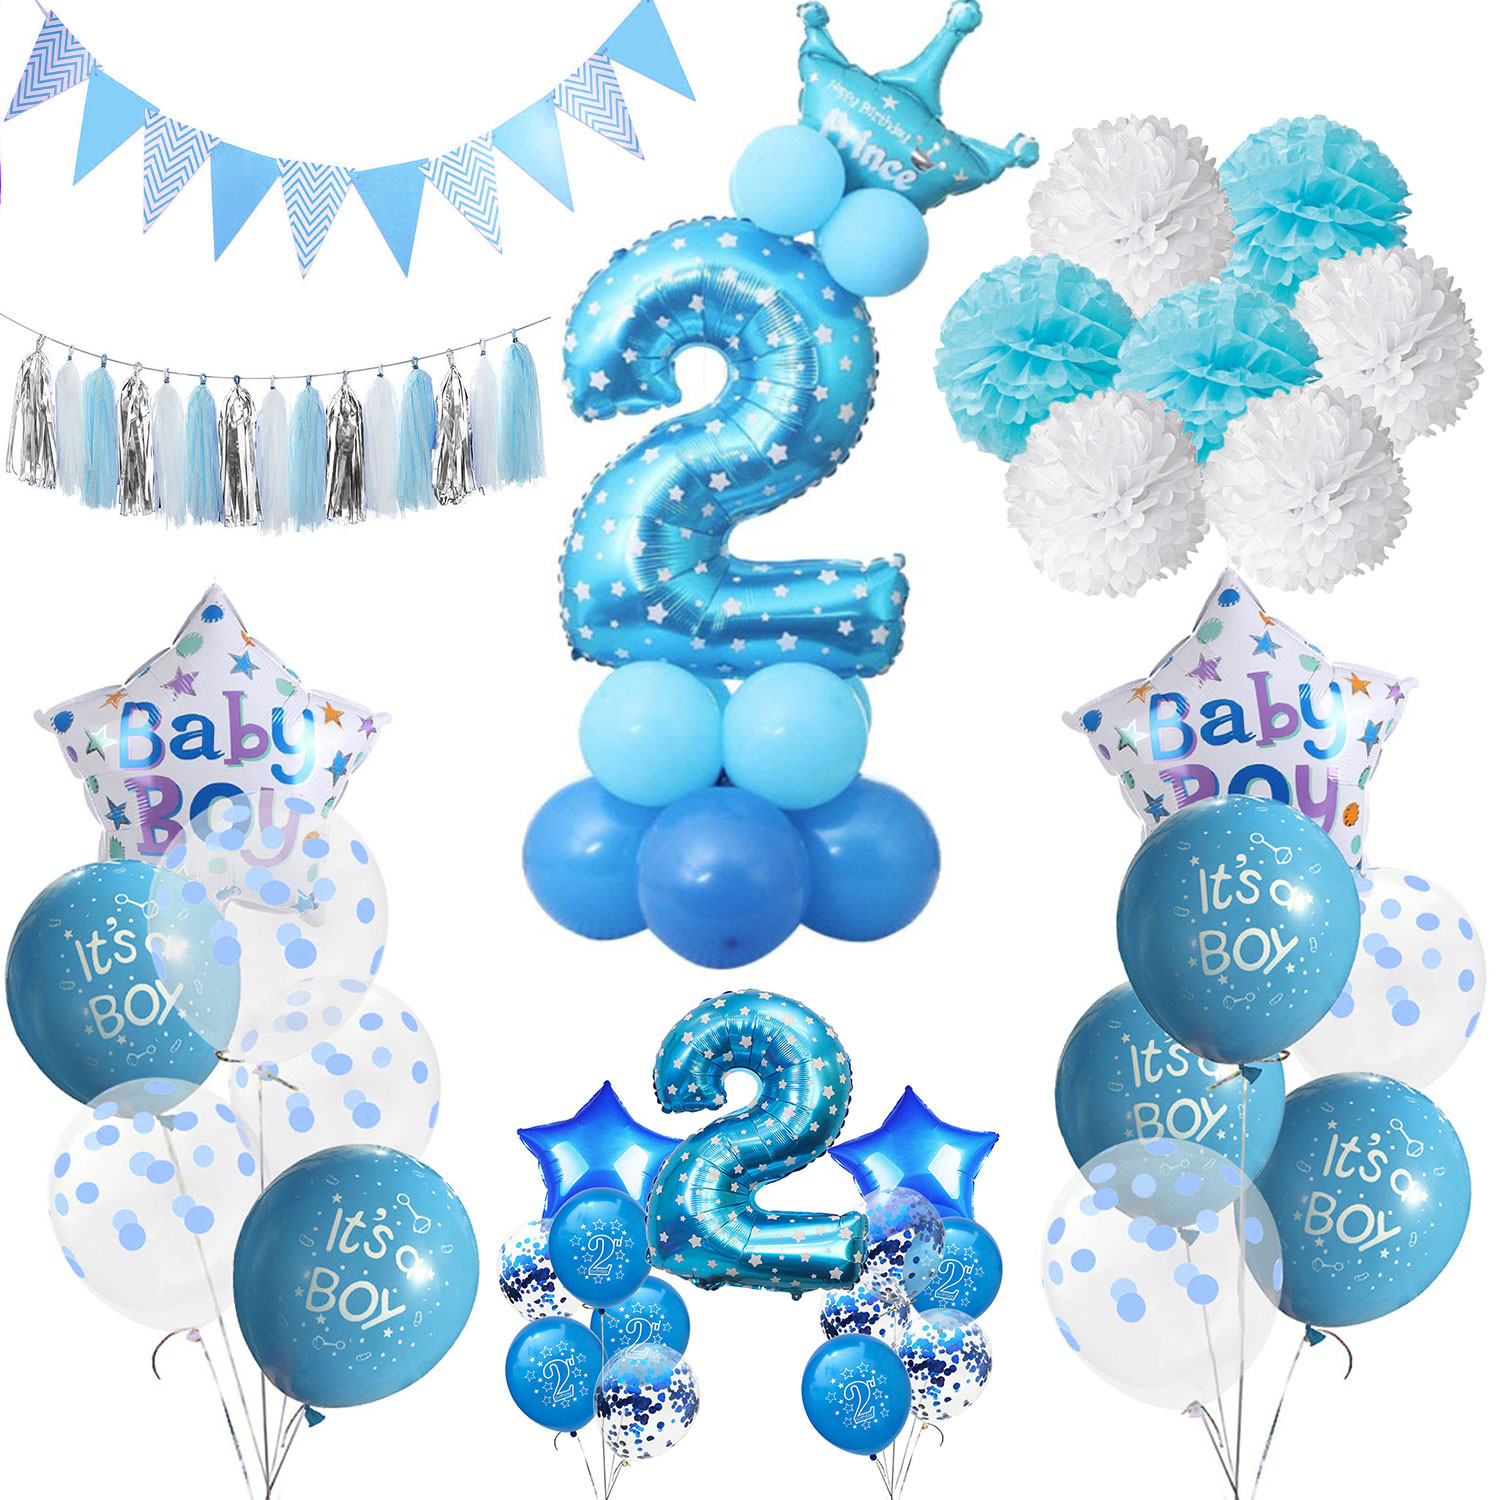 Two Years Old Birthday Party Ideas
 ZLJQ Boy 2 Year Old Birthday Party Decor Foil Confetti